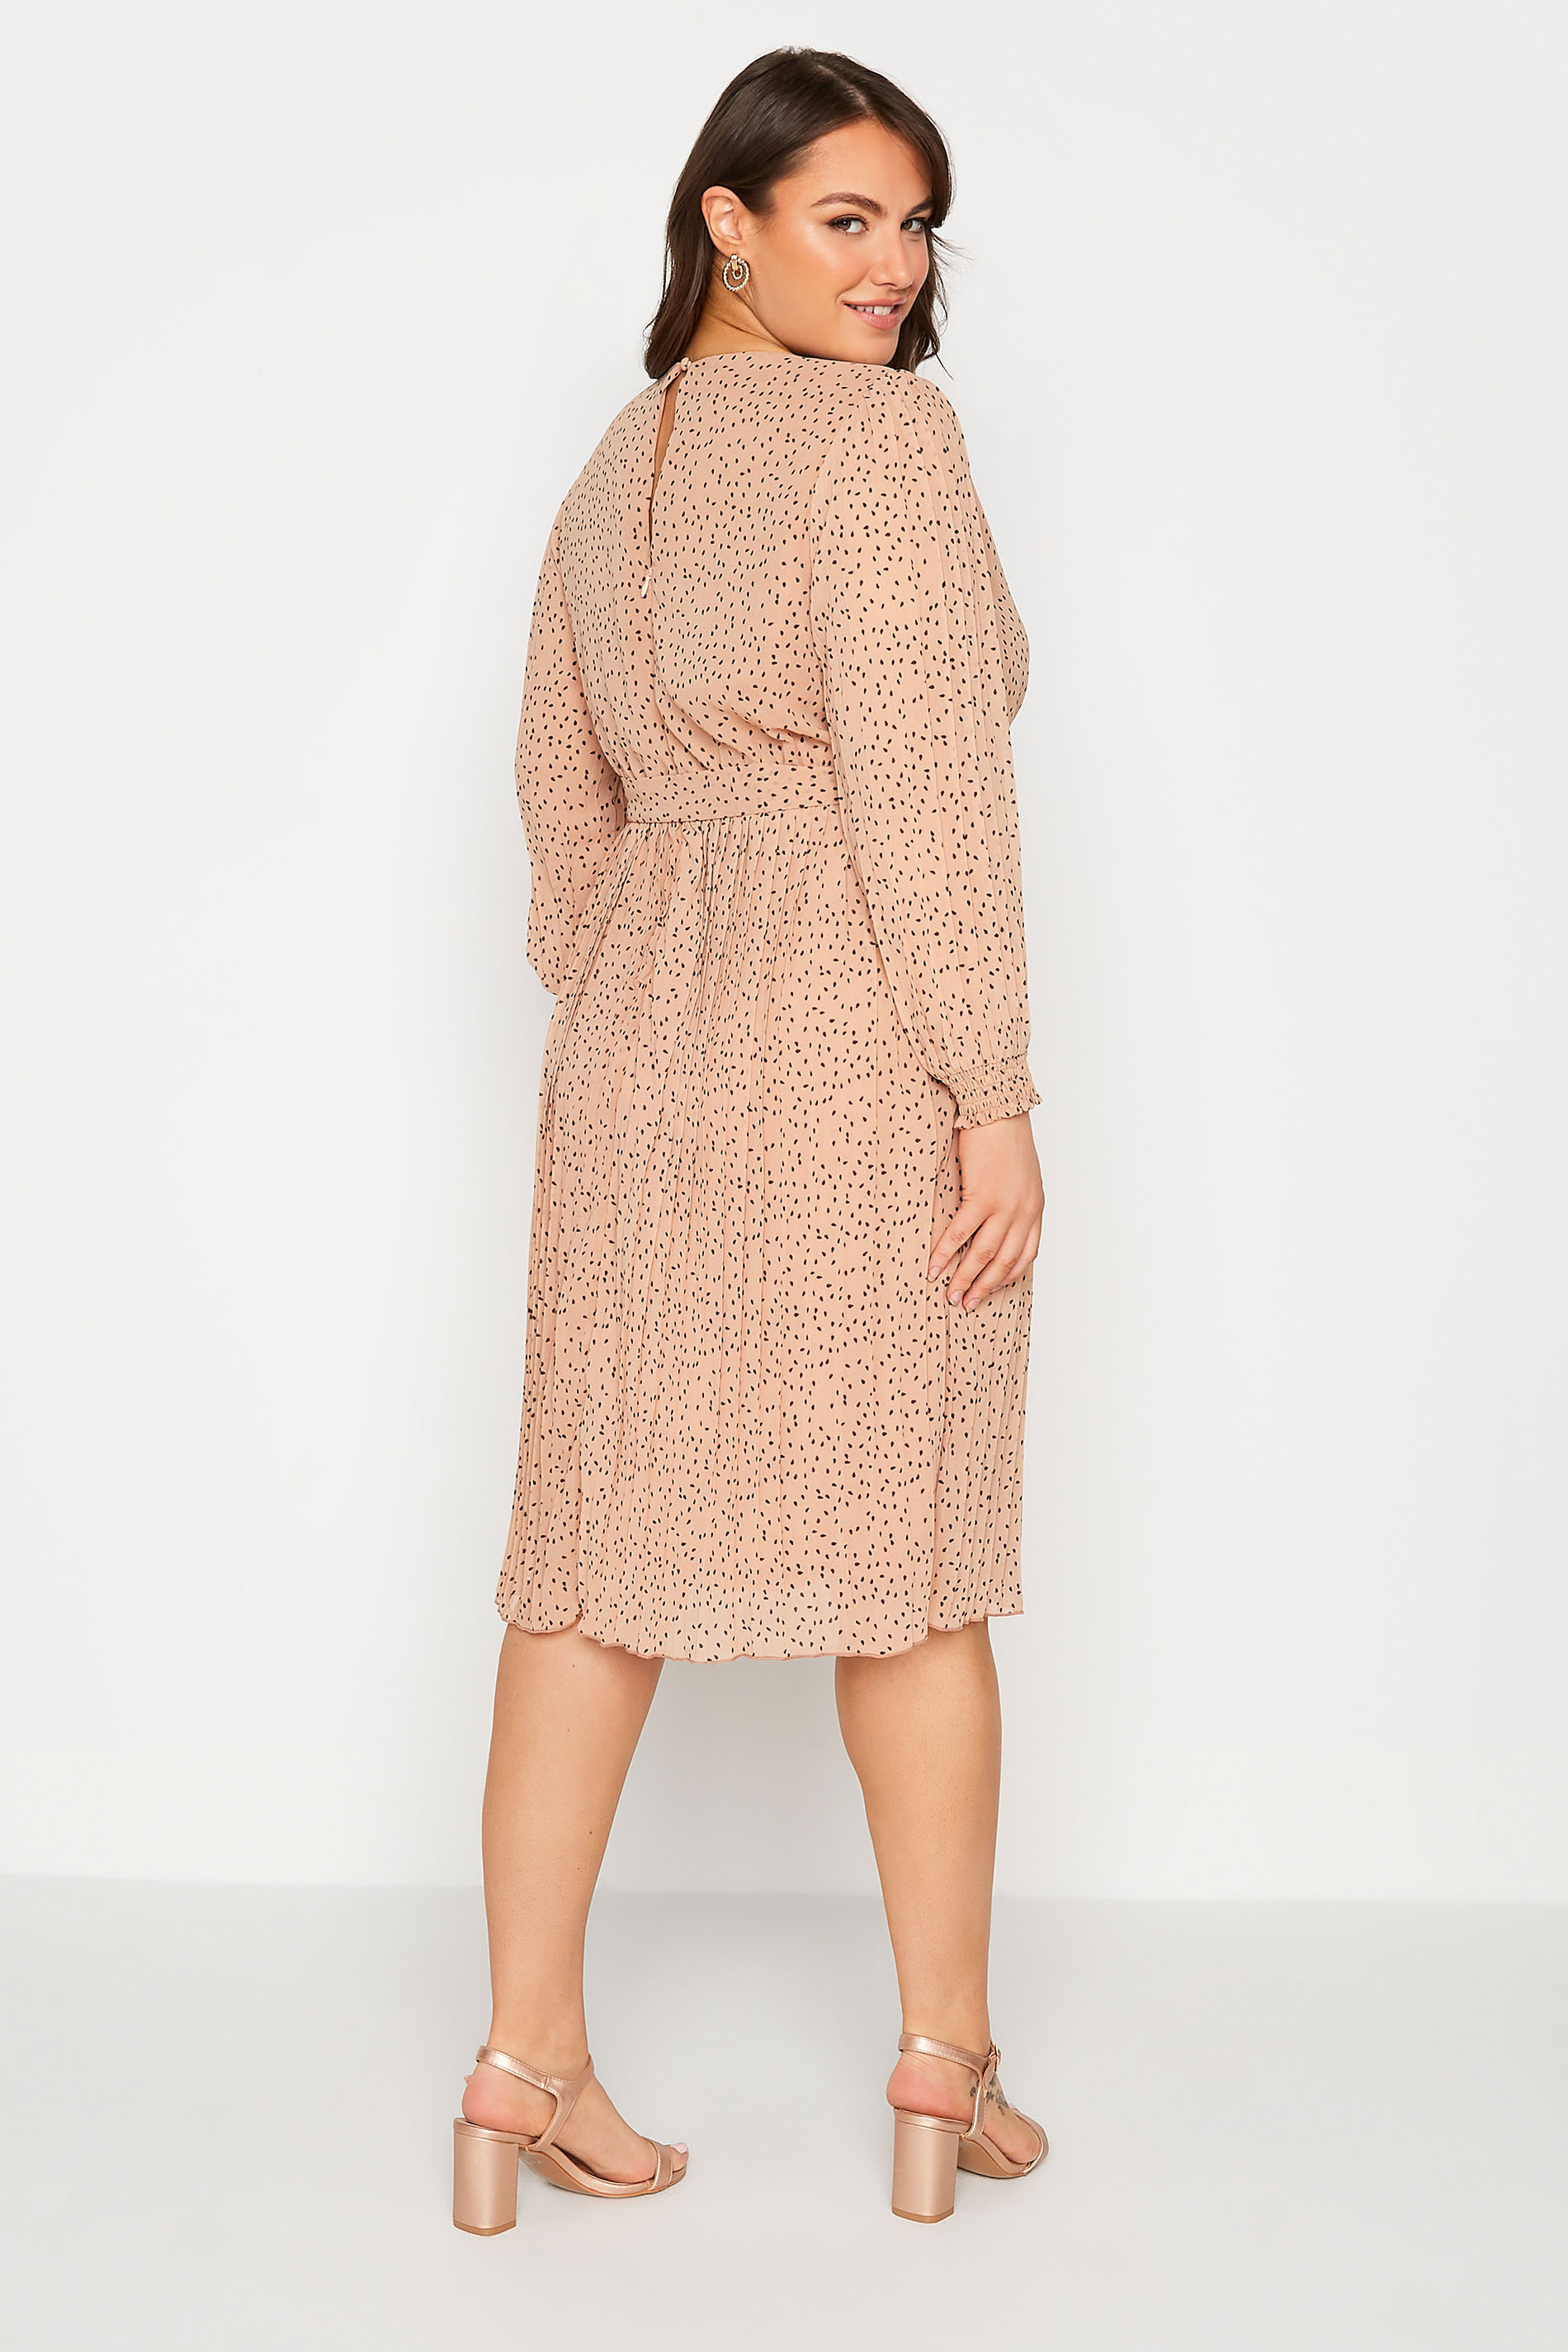 YOURS LONDON Plus Size Beige Brown Spot Print Pleated Wrap Dress | Yours Clothing 3